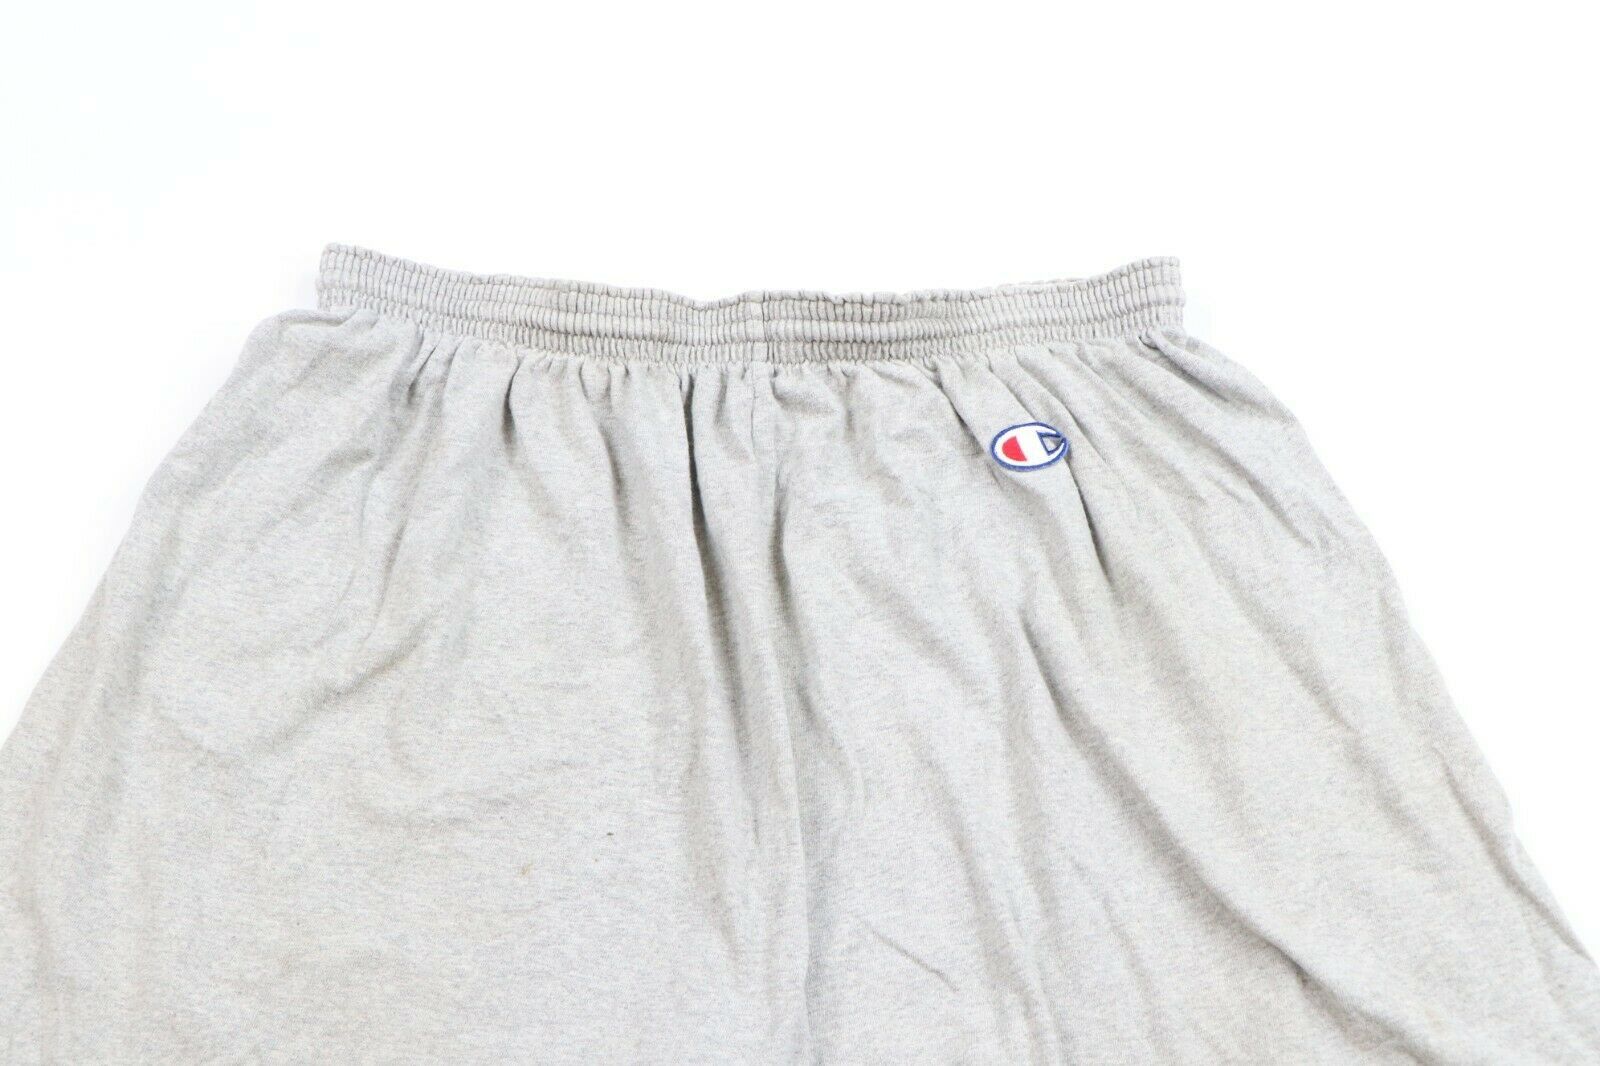 Vintage Vintage 90s Champion Above Knee Dad Shorts Gray Size US 38 / EU 54 - 2 Preview